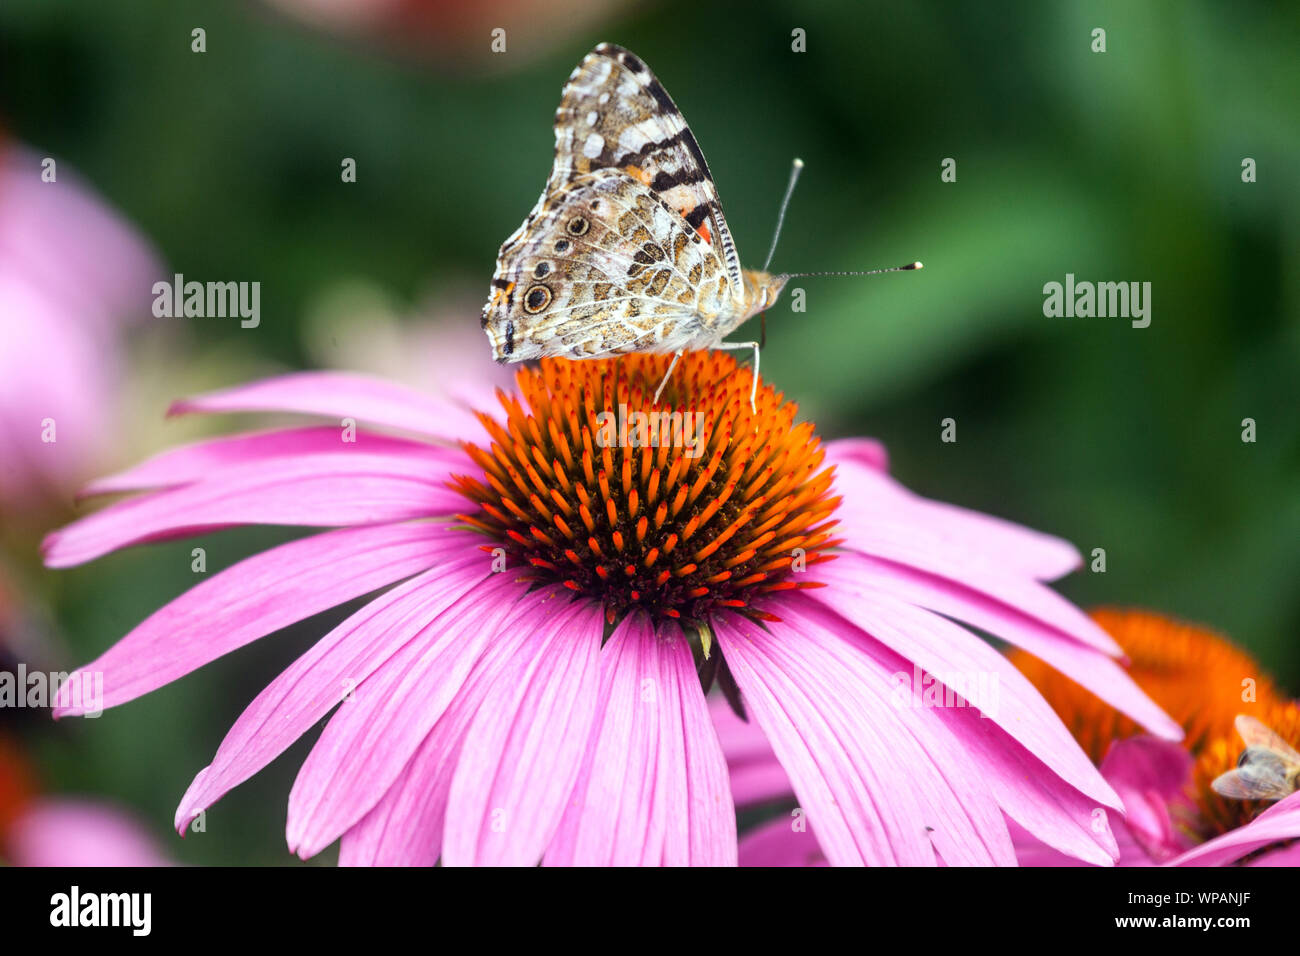 Butterfly on flower feeding nectar, Purple coneflower, Painted lady butterfly on Echinacea flower Stock Photo